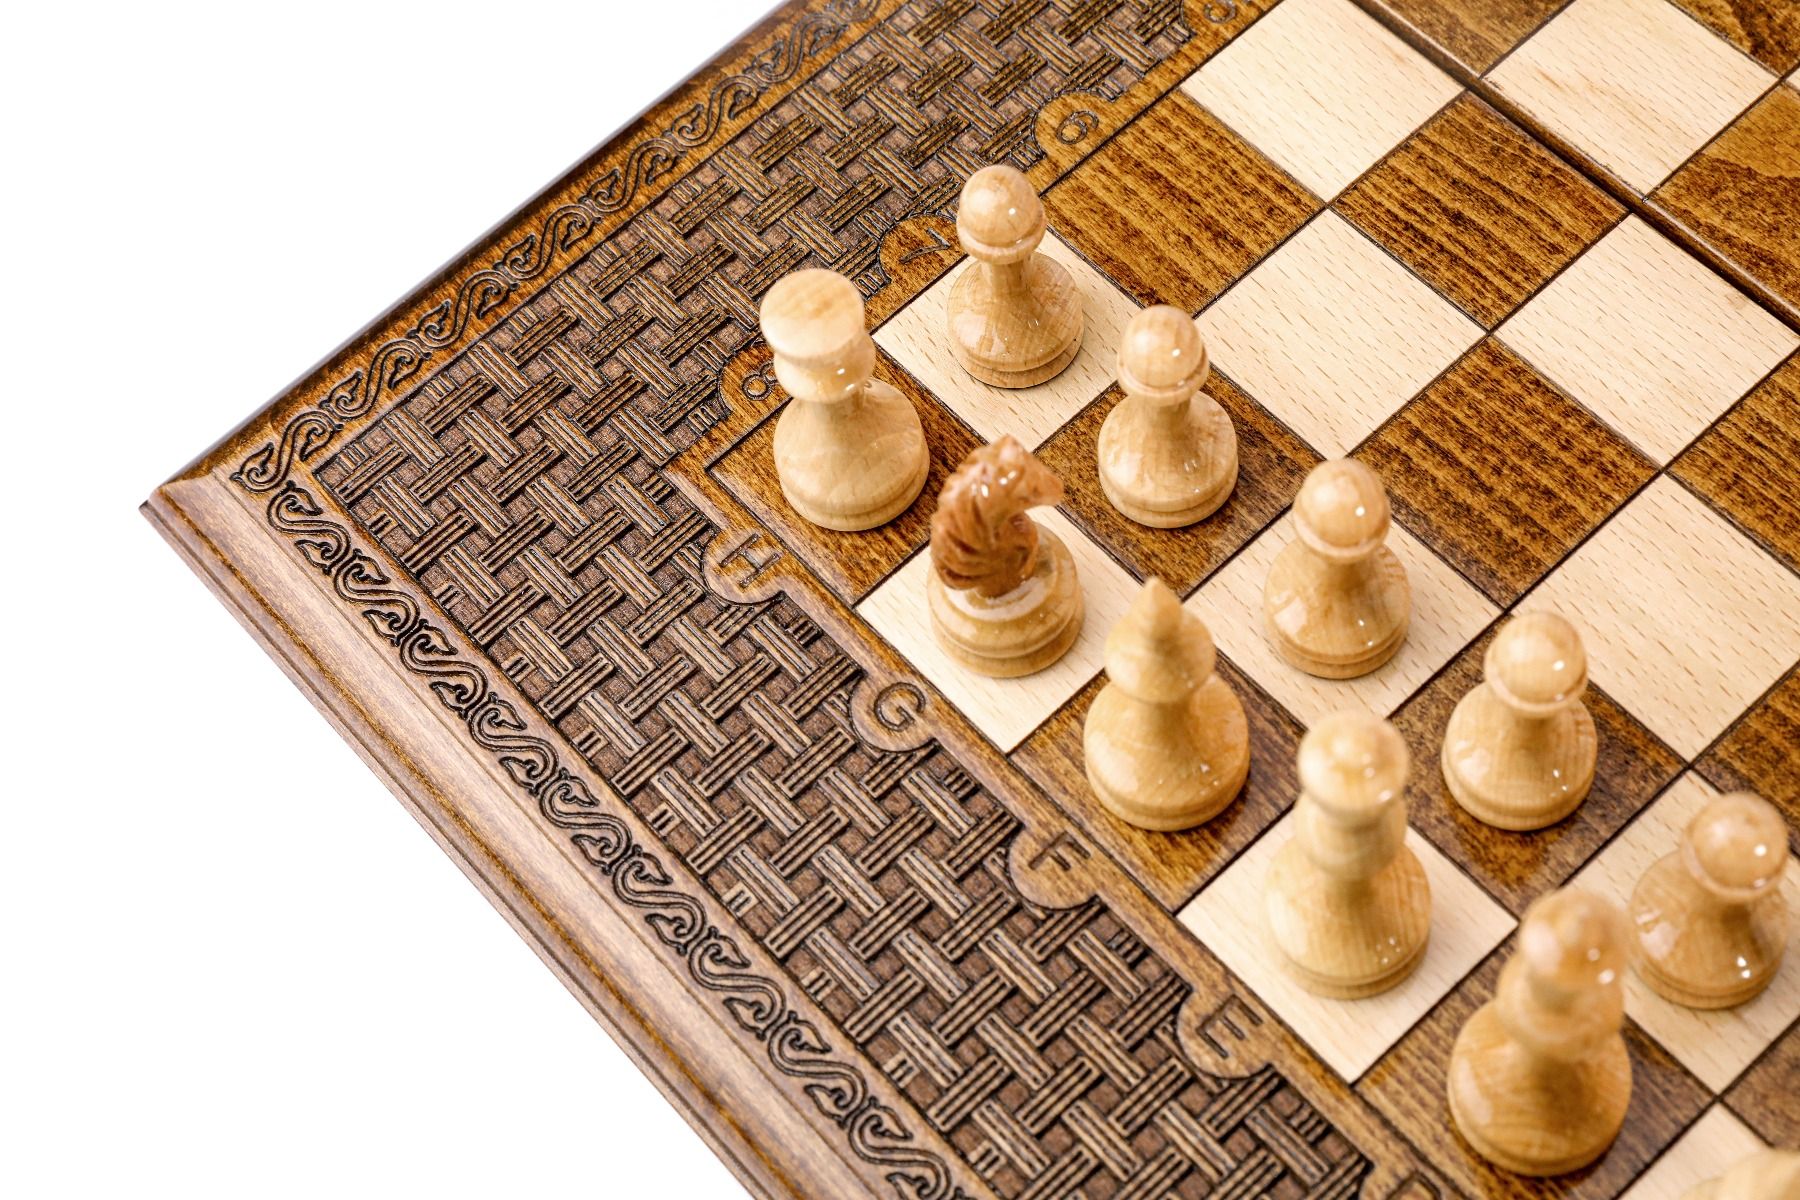 Let each game unfold with the Unique Wooden Chess and Backgammon Set, where strategy and art converge in a celebration of traditional gameplay and exquisite craftsmanship.